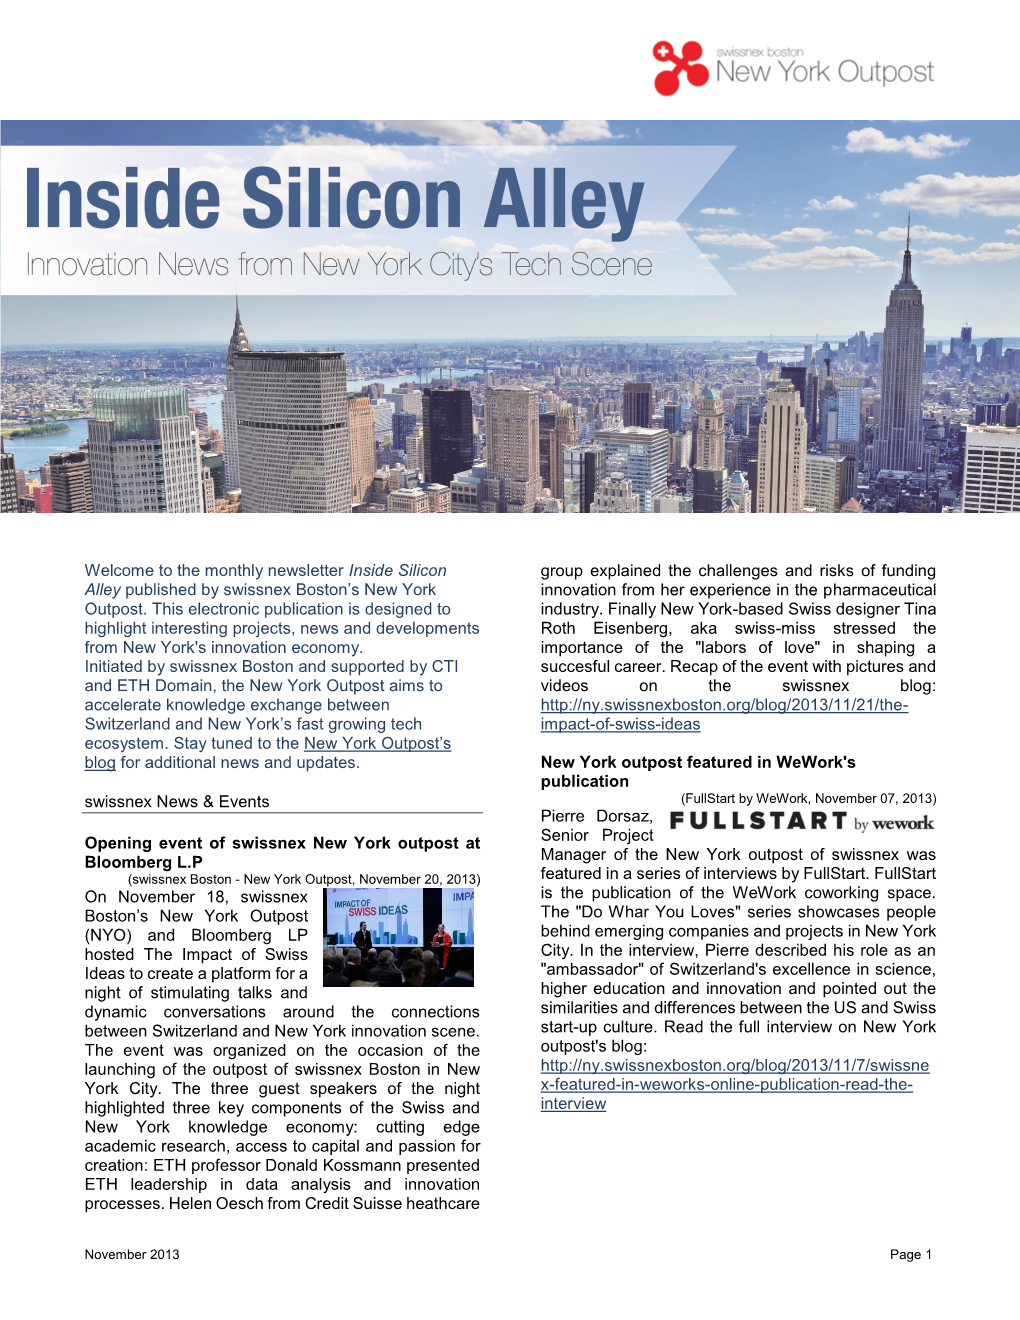 "Inside Silicon Alley": Innovation News from New York City Tech Scene